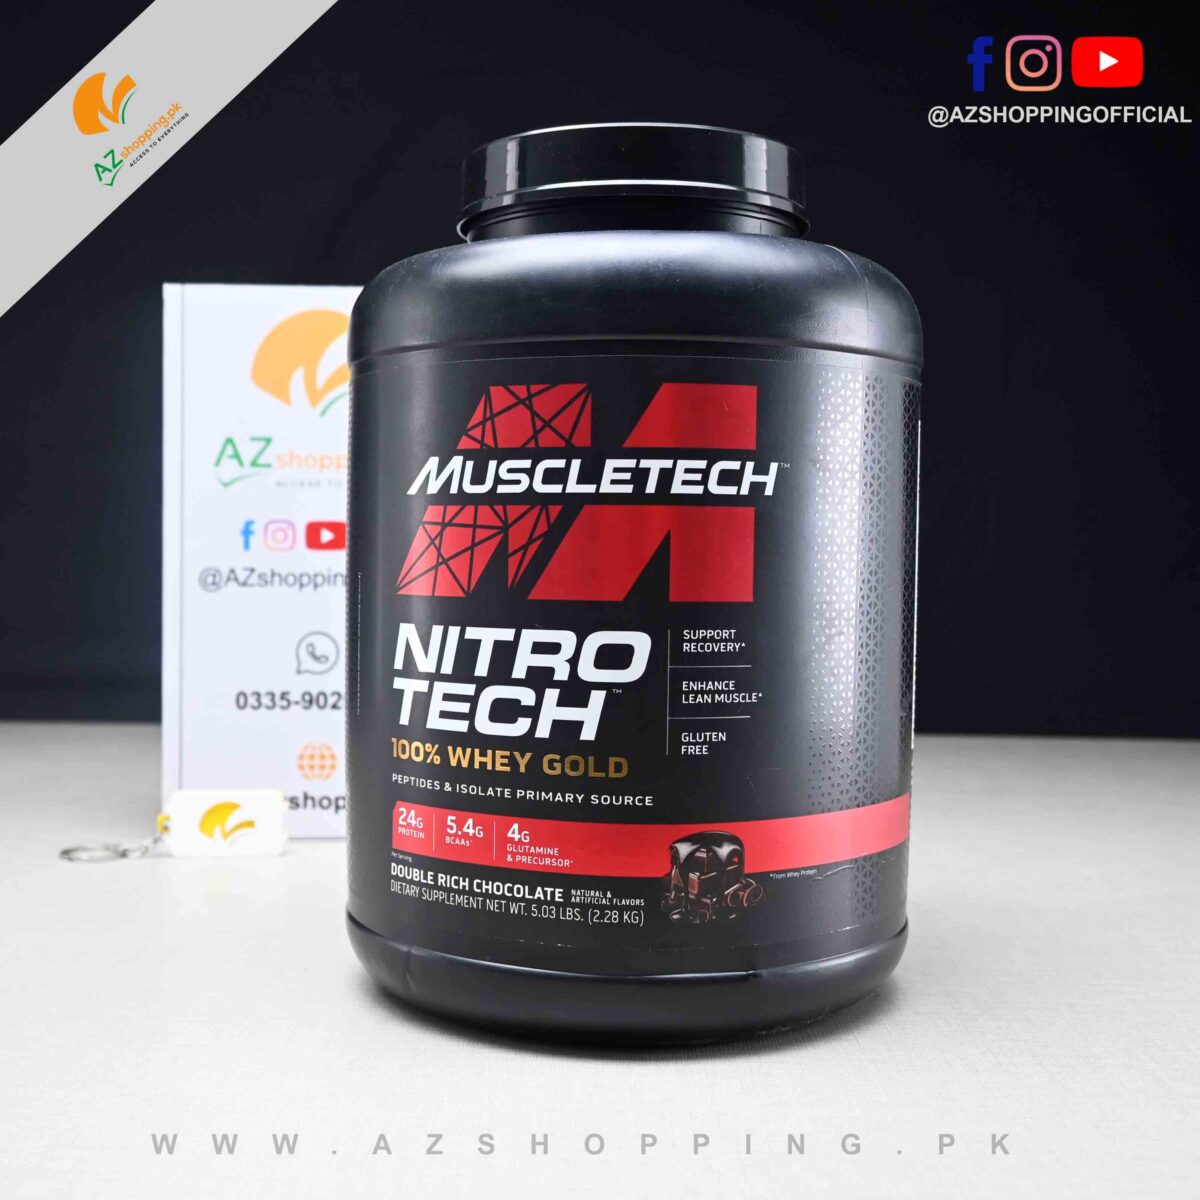 Muscletech – Nitrotech 100% Whey Gold Peptides & Isolate Primary Source for Support Recovery, Enhanced Lean Muscle & Gluten Free – 5 lbs